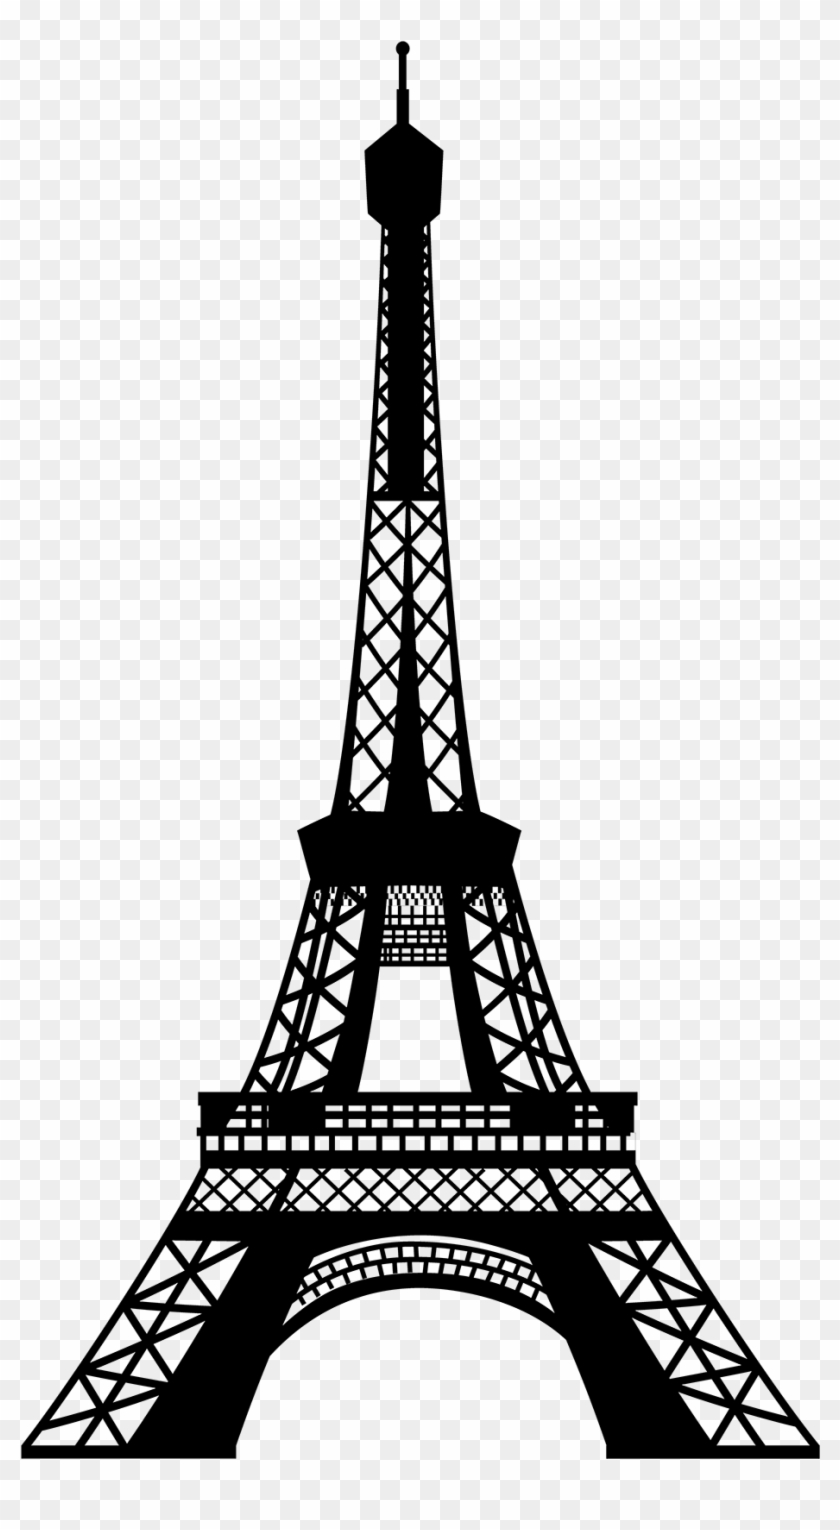 Download Eiffel Tower Silhouette Drawing - Eiffel Tower Png - Free ...